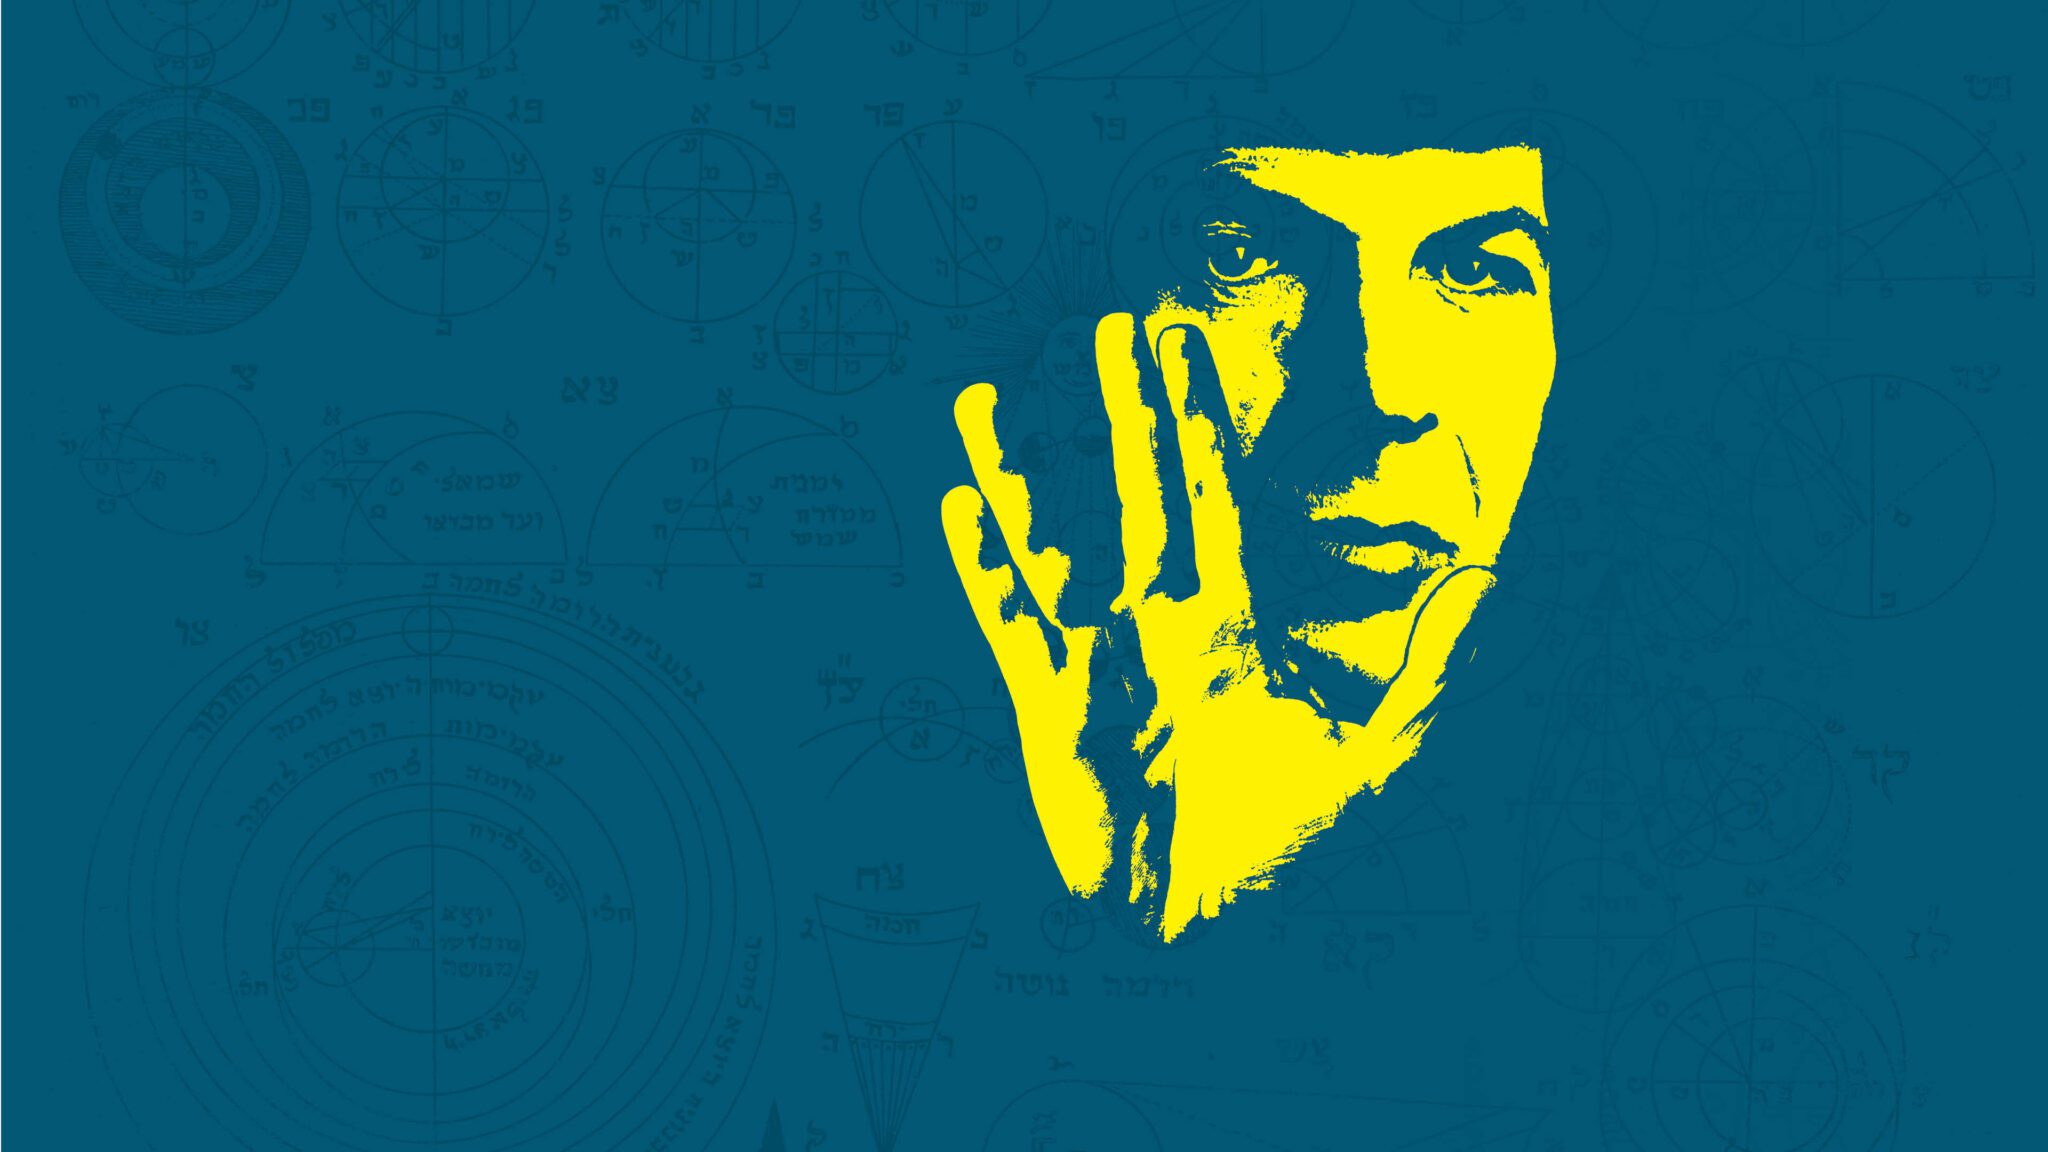 Background Spock Website from Jews in Space